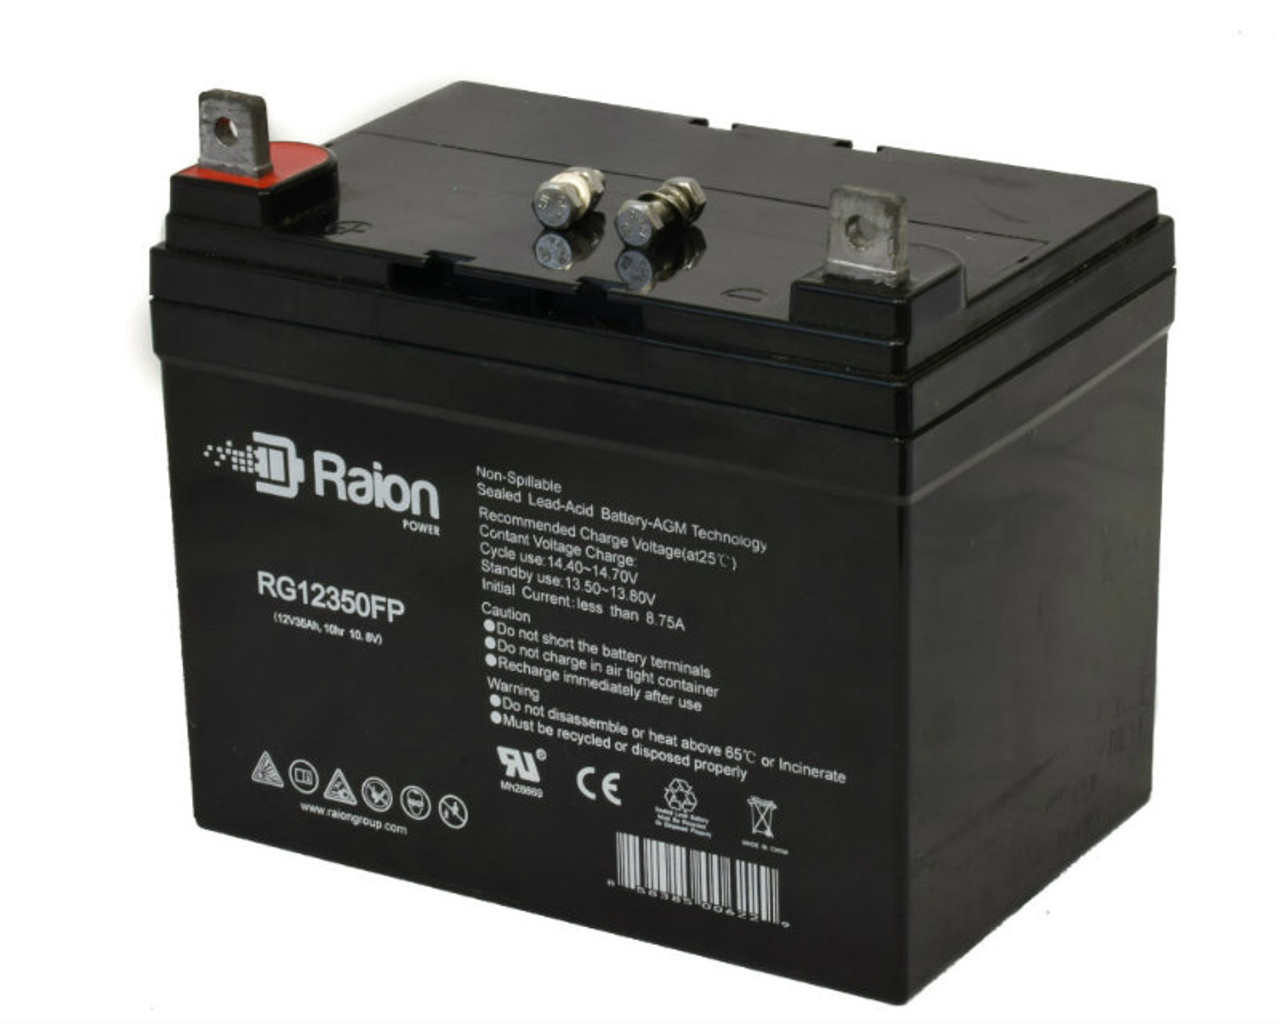 Raion Power Replacement 12V 35Ah RG12350FP Battery for Noma 2046P